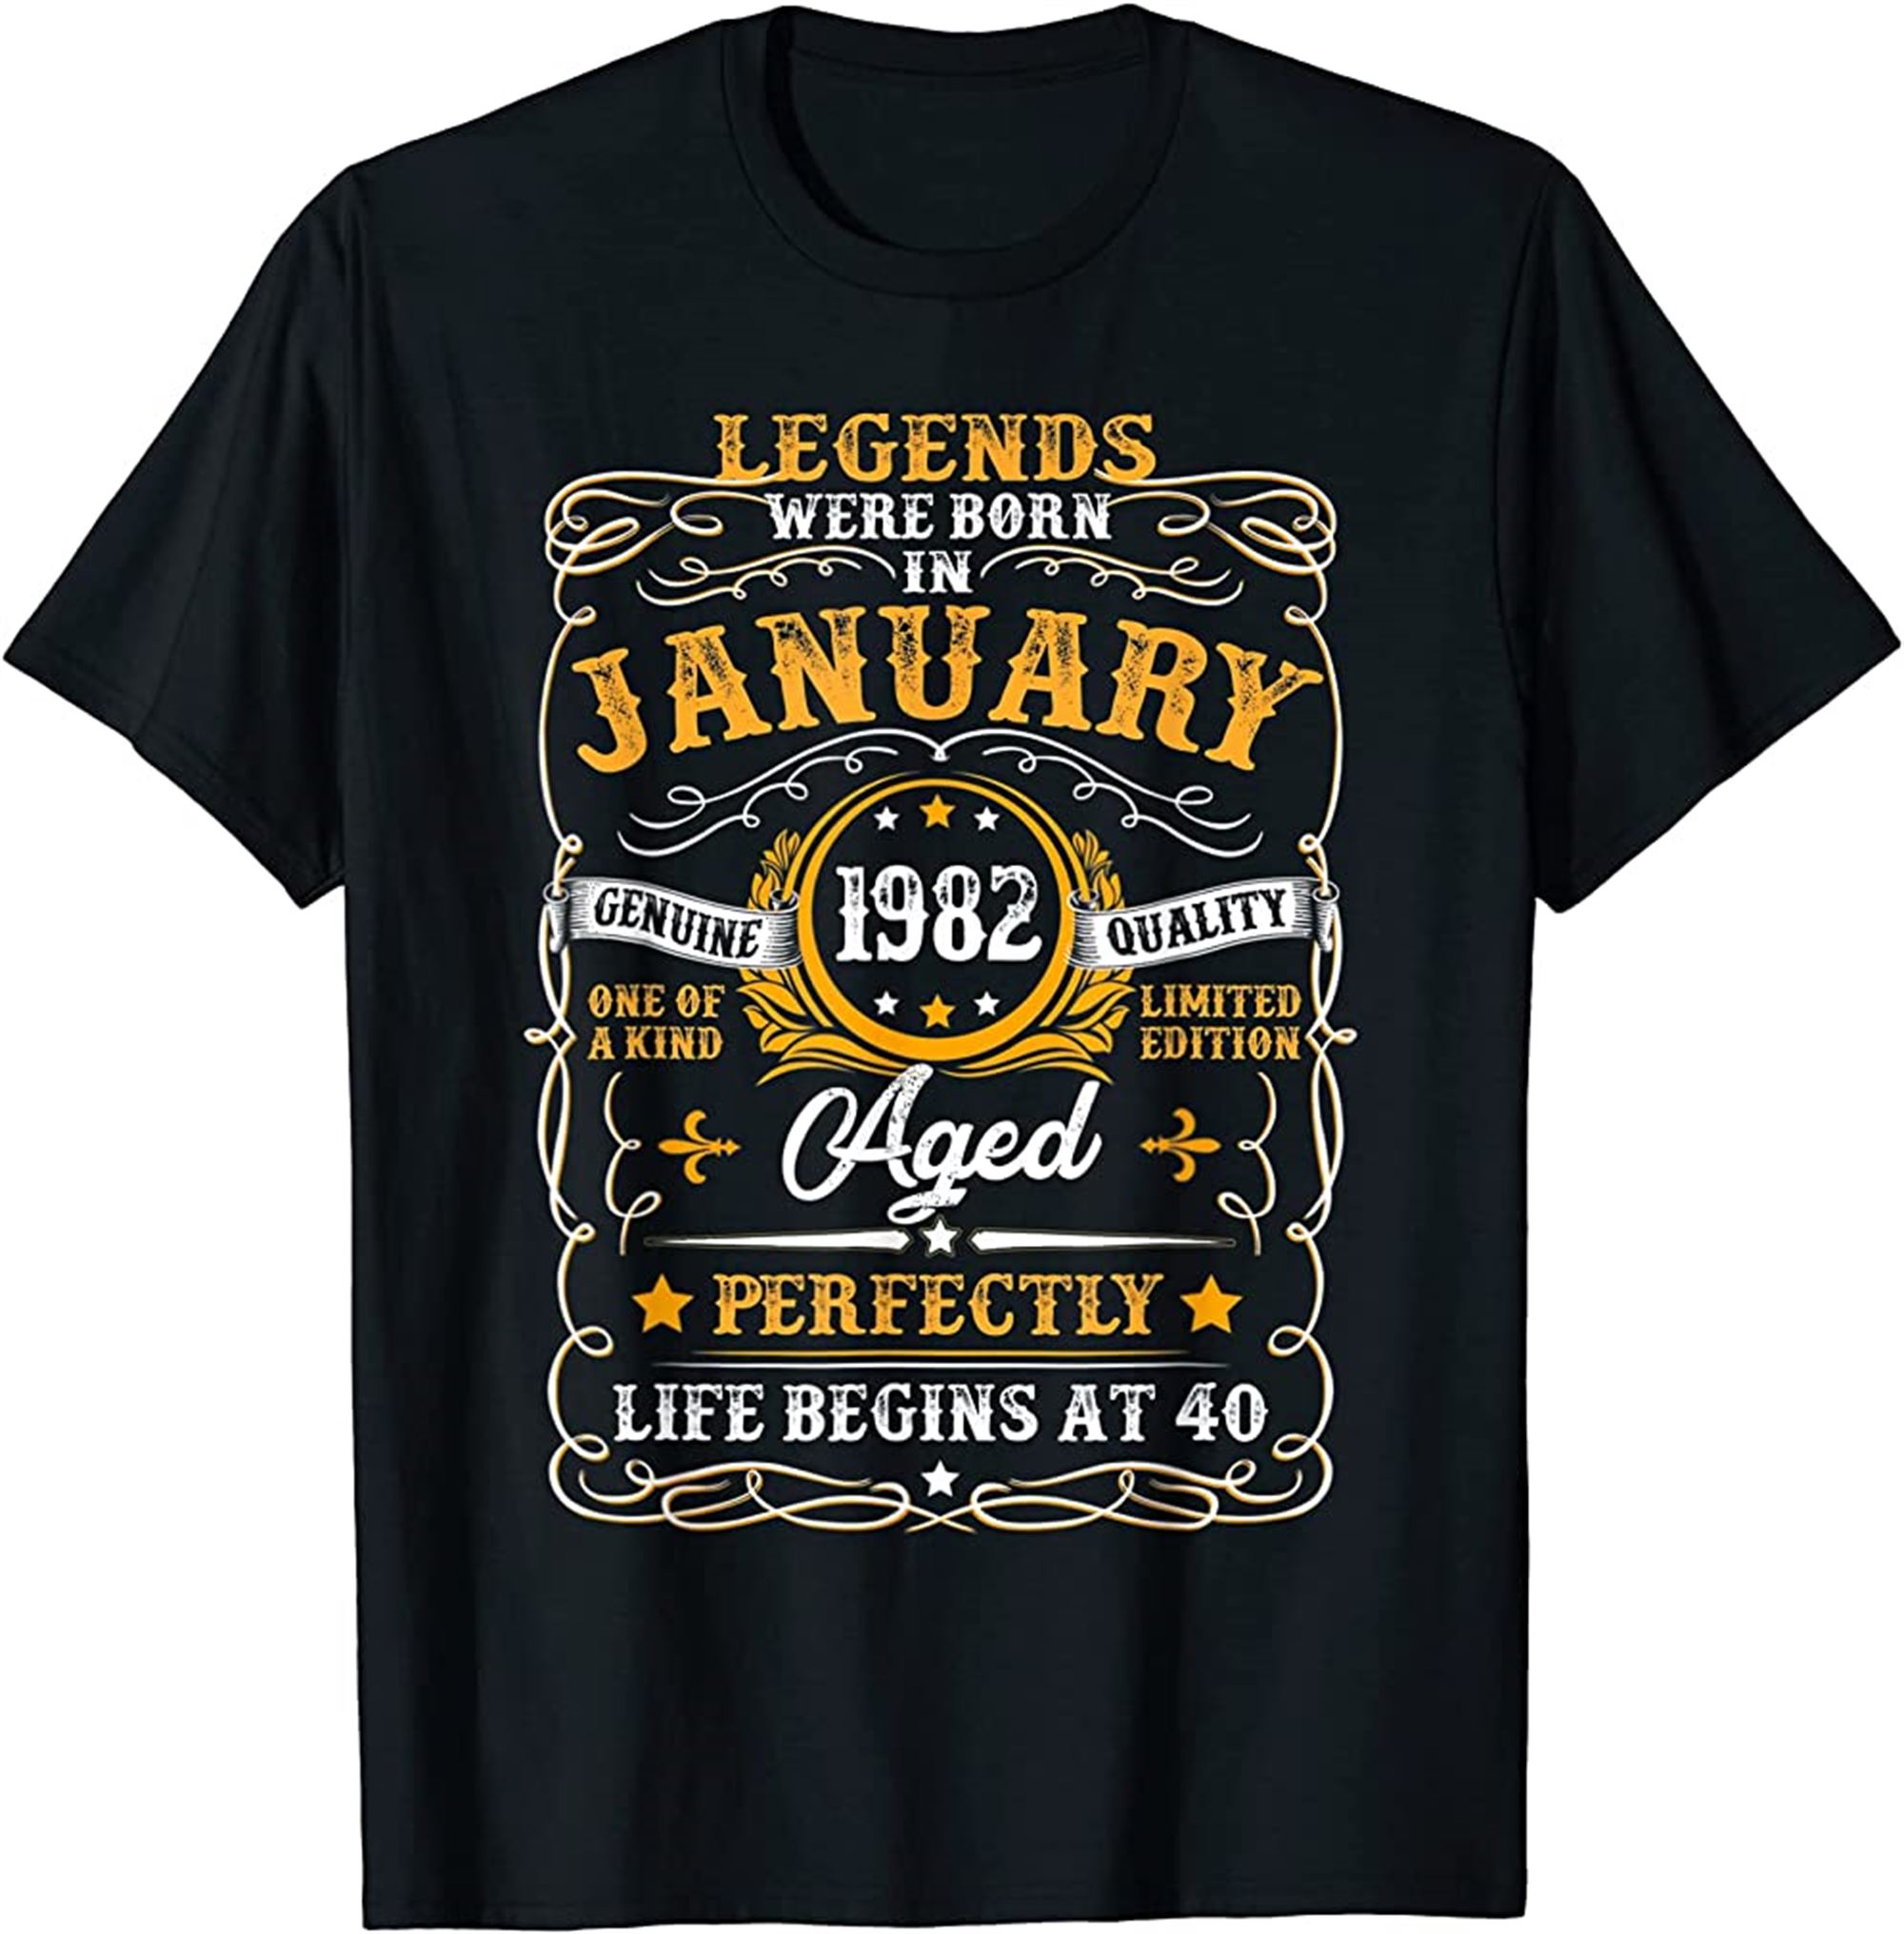 January 1982 Retro Vintage 40 Years Old 40th Birthday Gift T-shirt Plus Size Up To 5xl